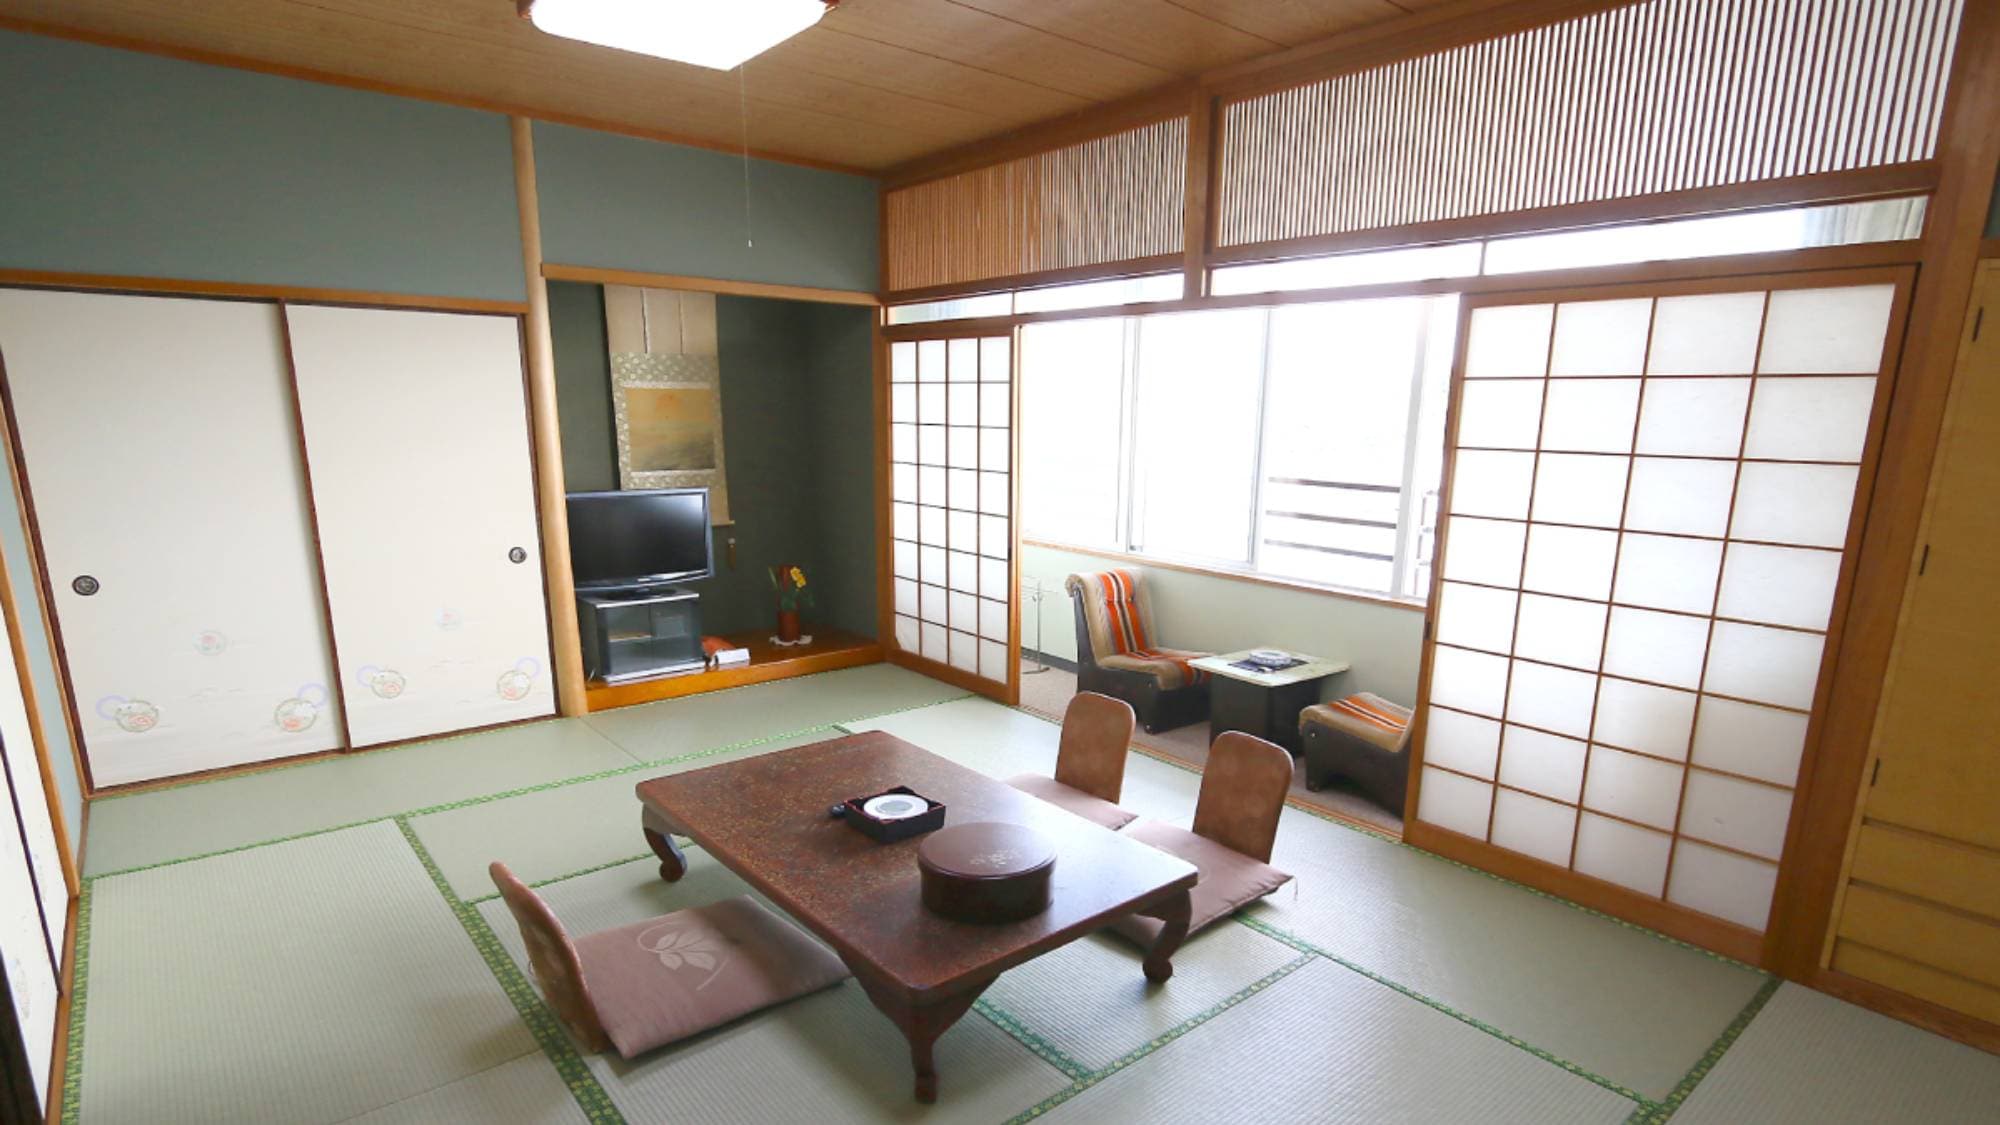 ・ [Example of guest room] A tatami room where you can relax and stretch your legs.